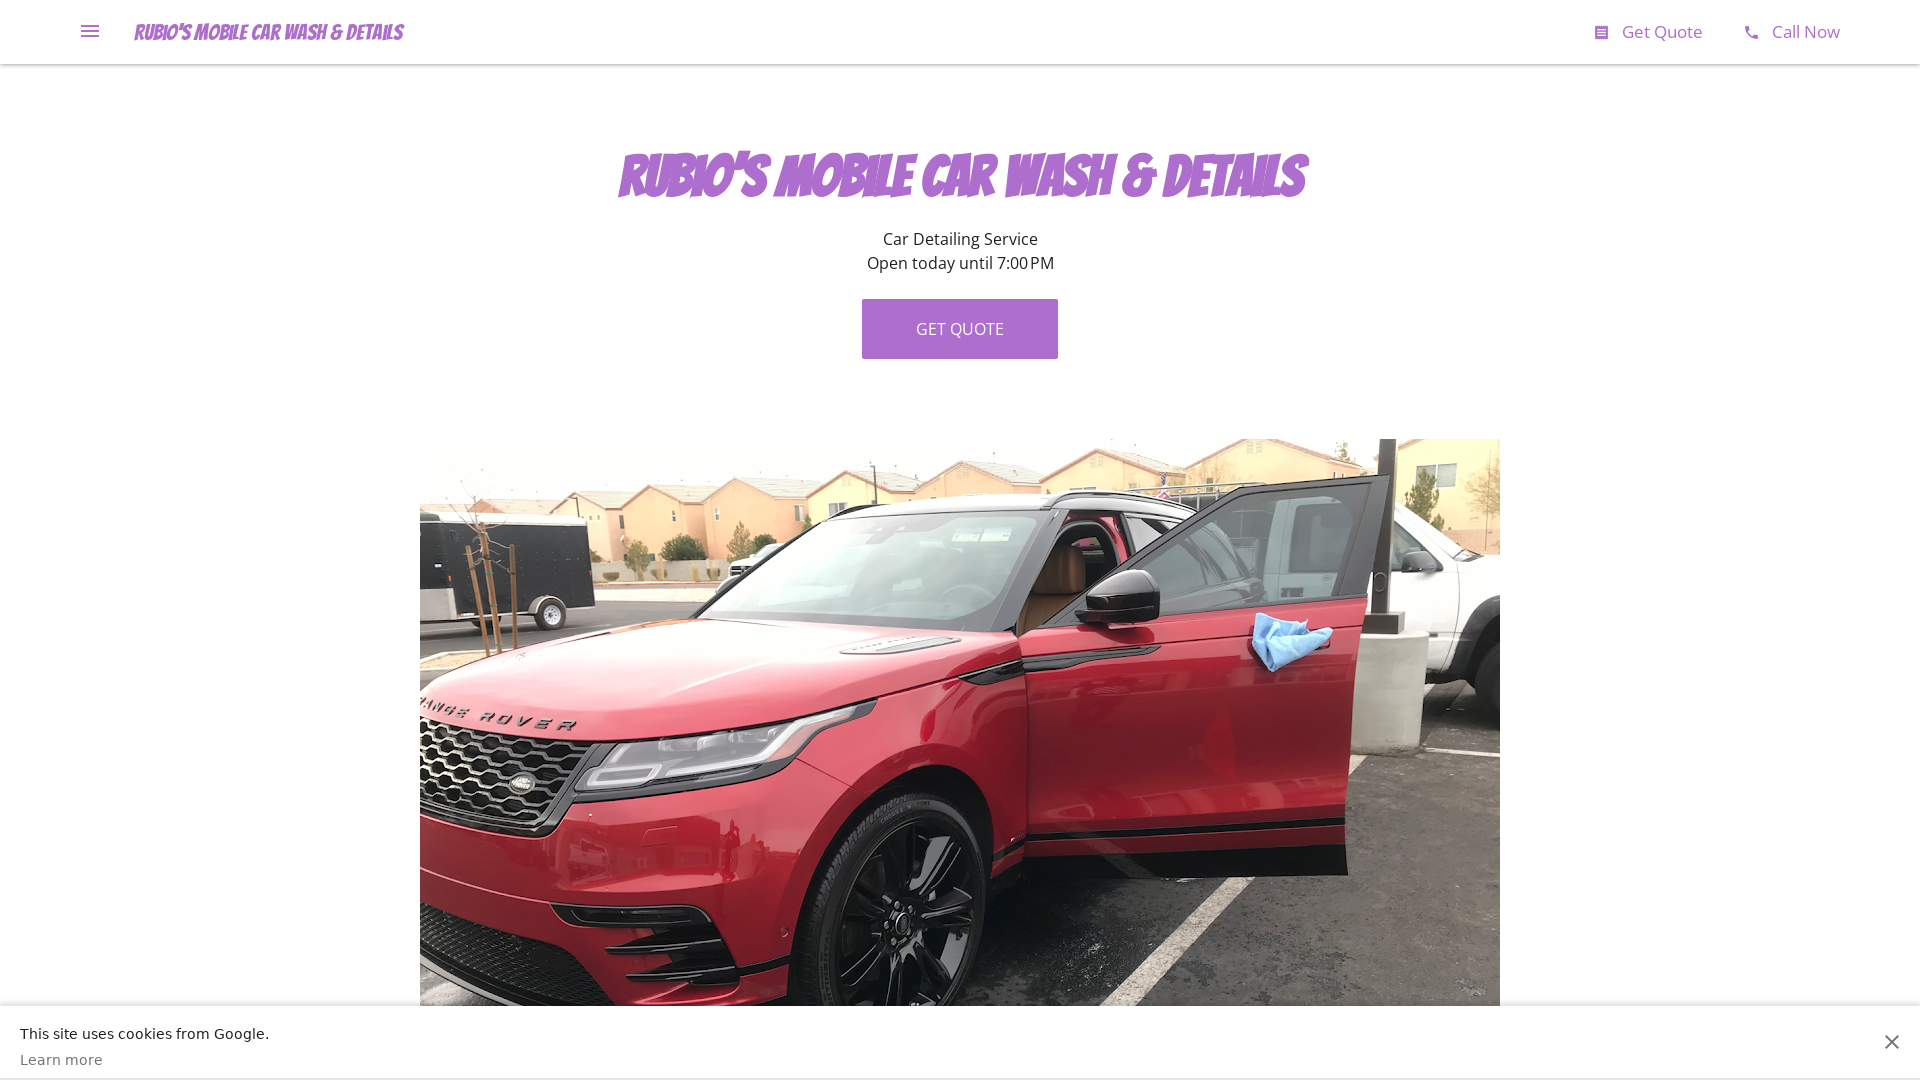 Rubio's Mobile Car Wash and Detailing